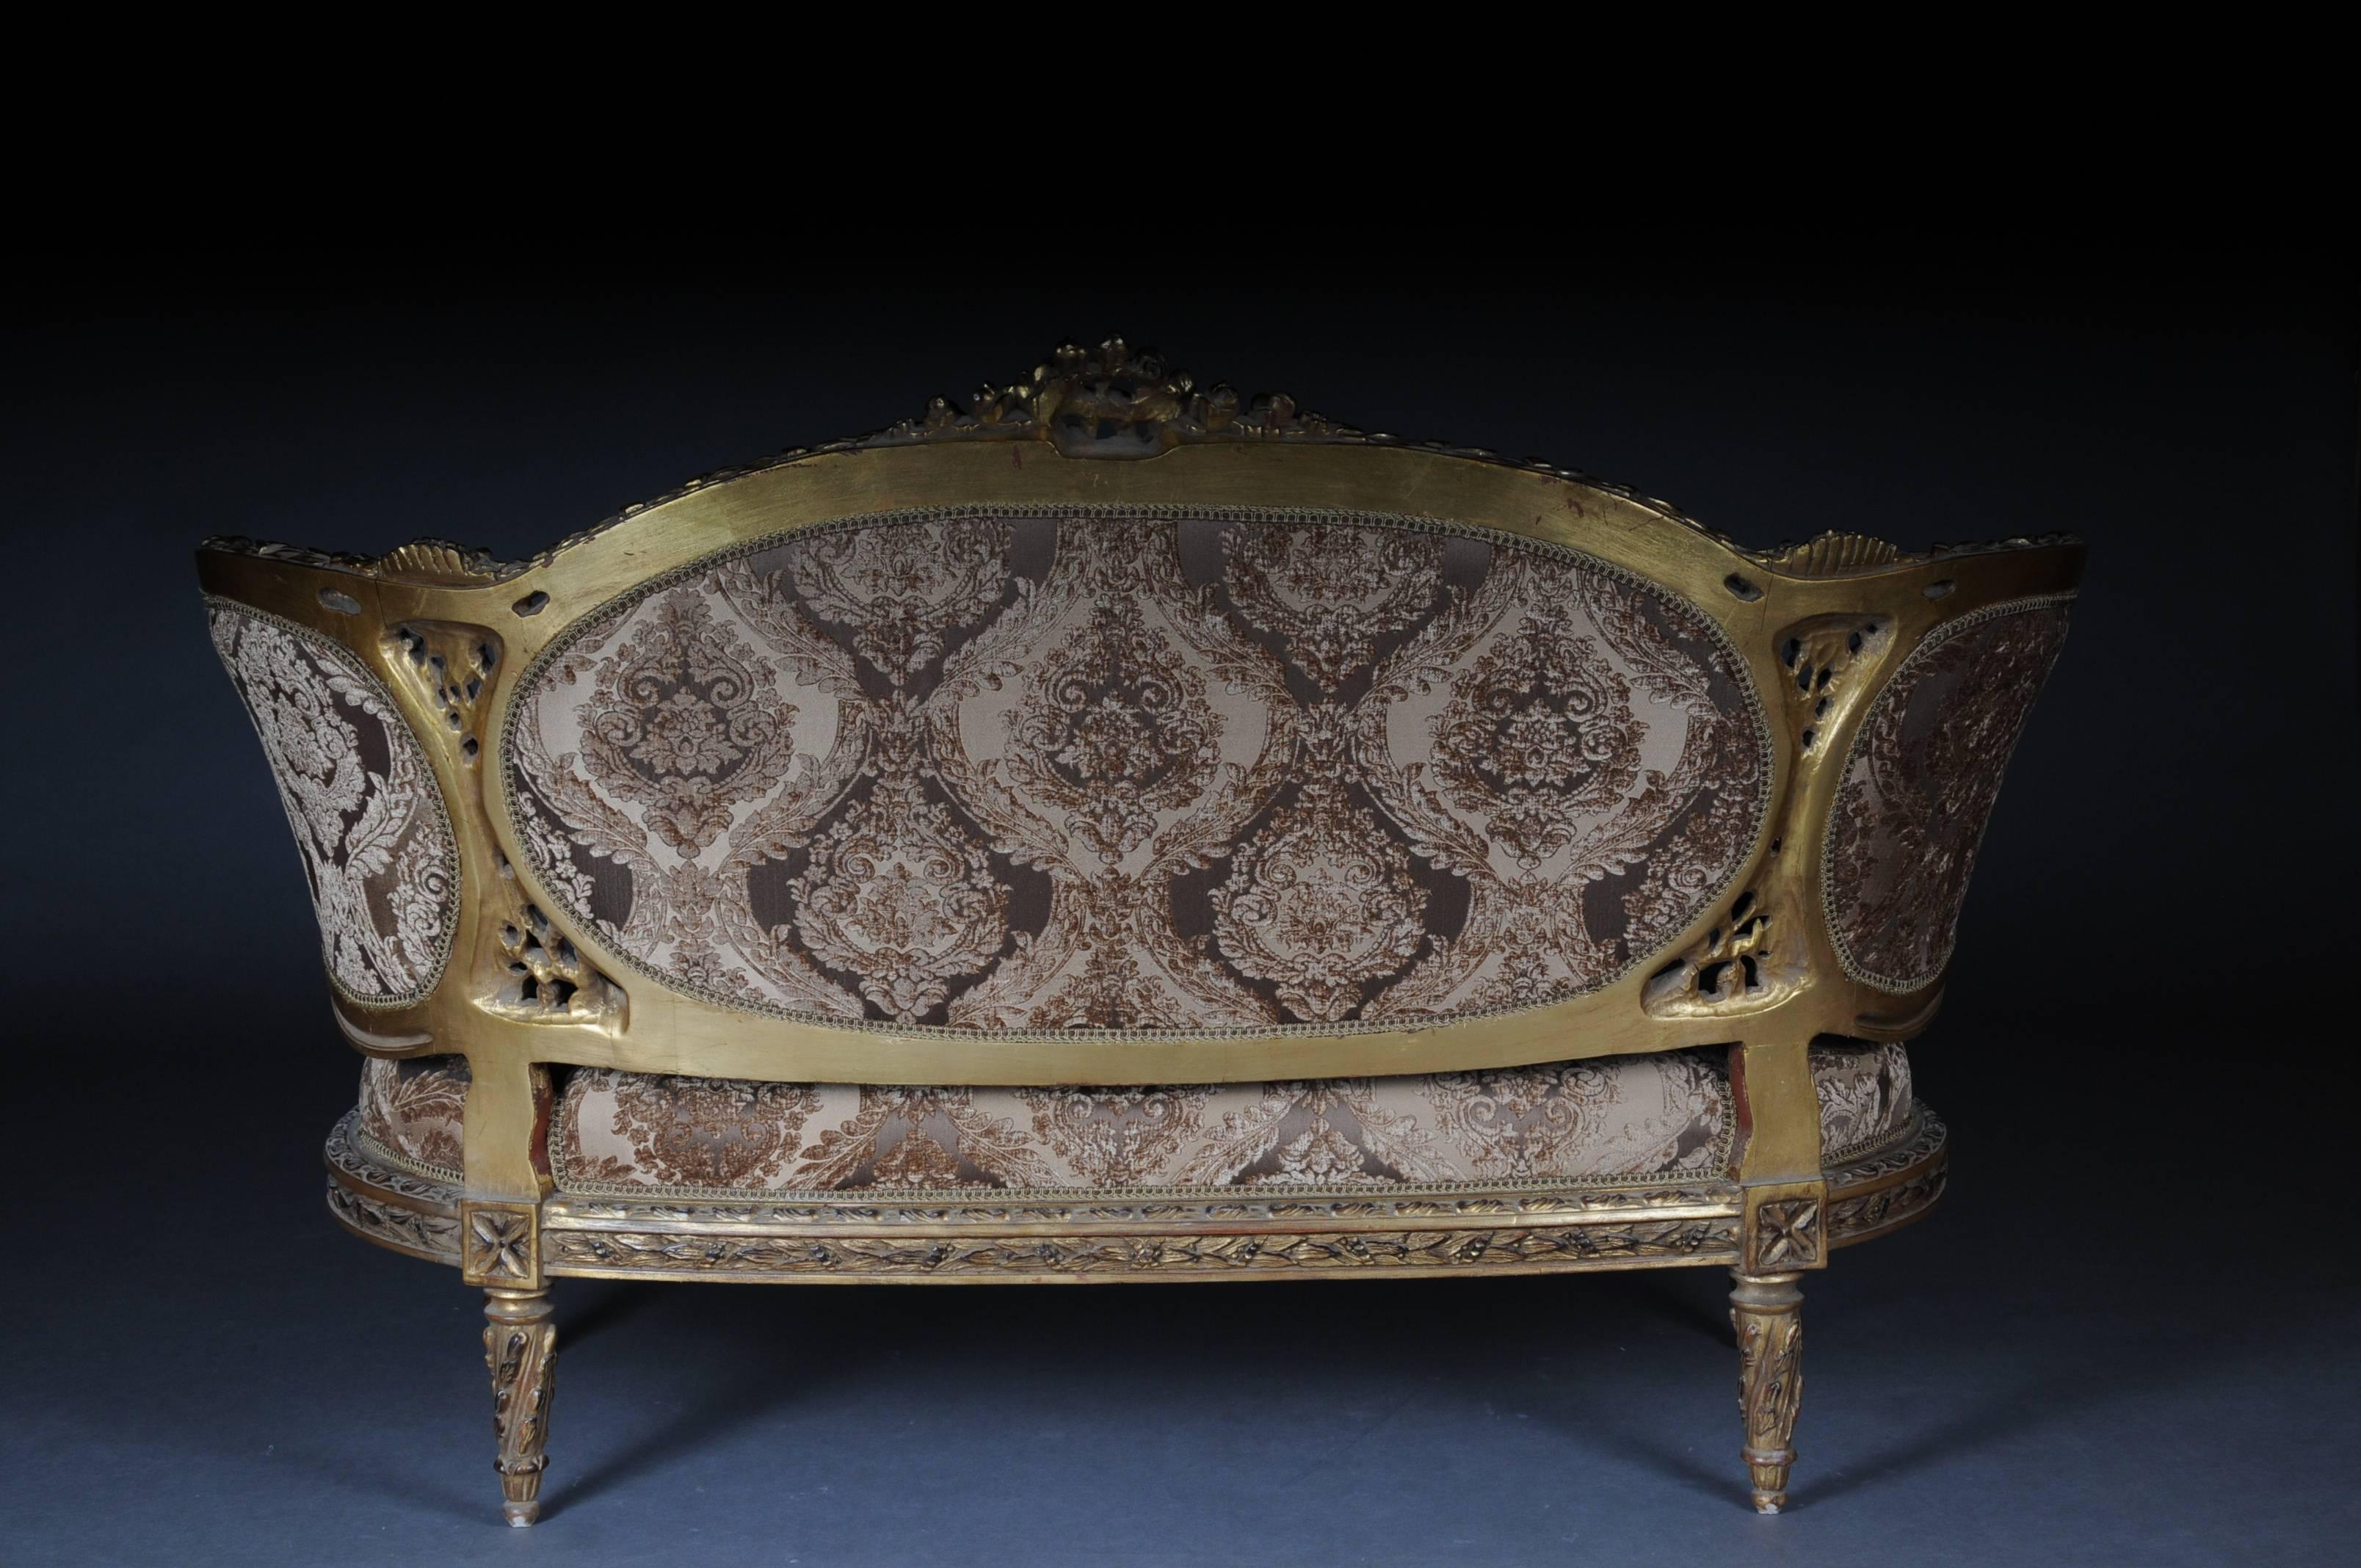 Magnificent French Sofa in the Louis XVI Seize 1